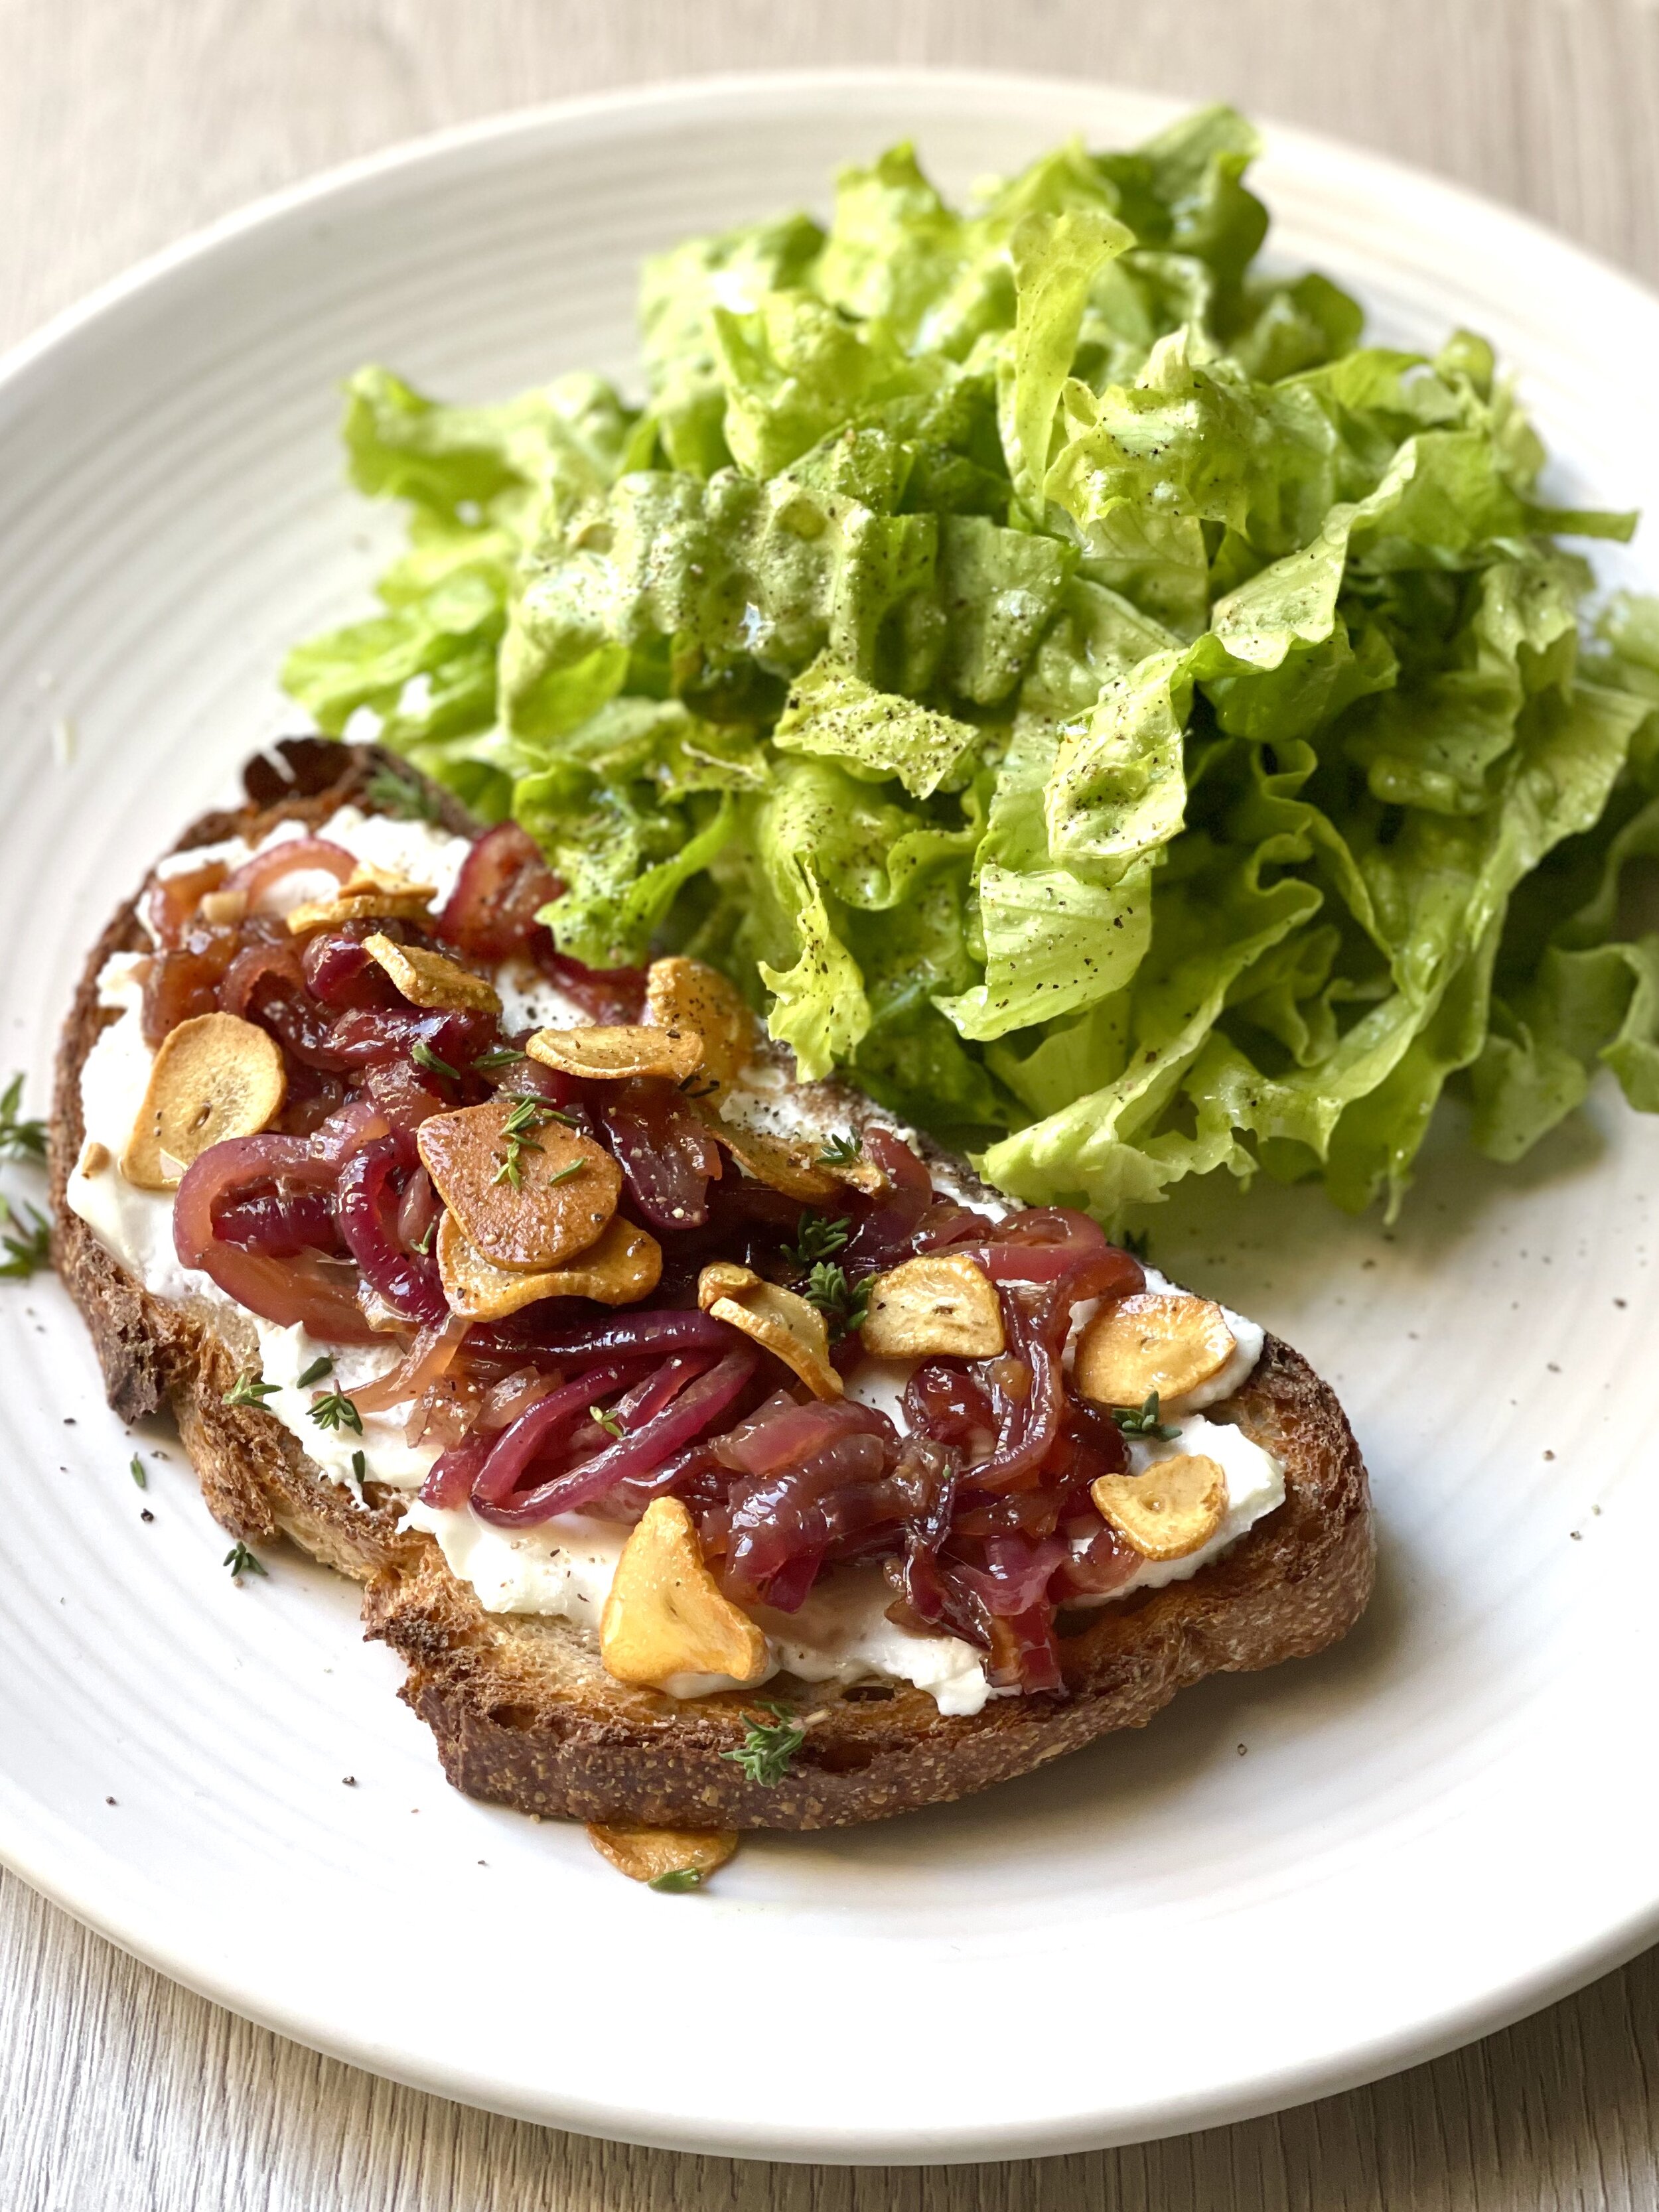 Red onion marmalade toast topper, with green salad and flavour hack Dijon vinaigrette